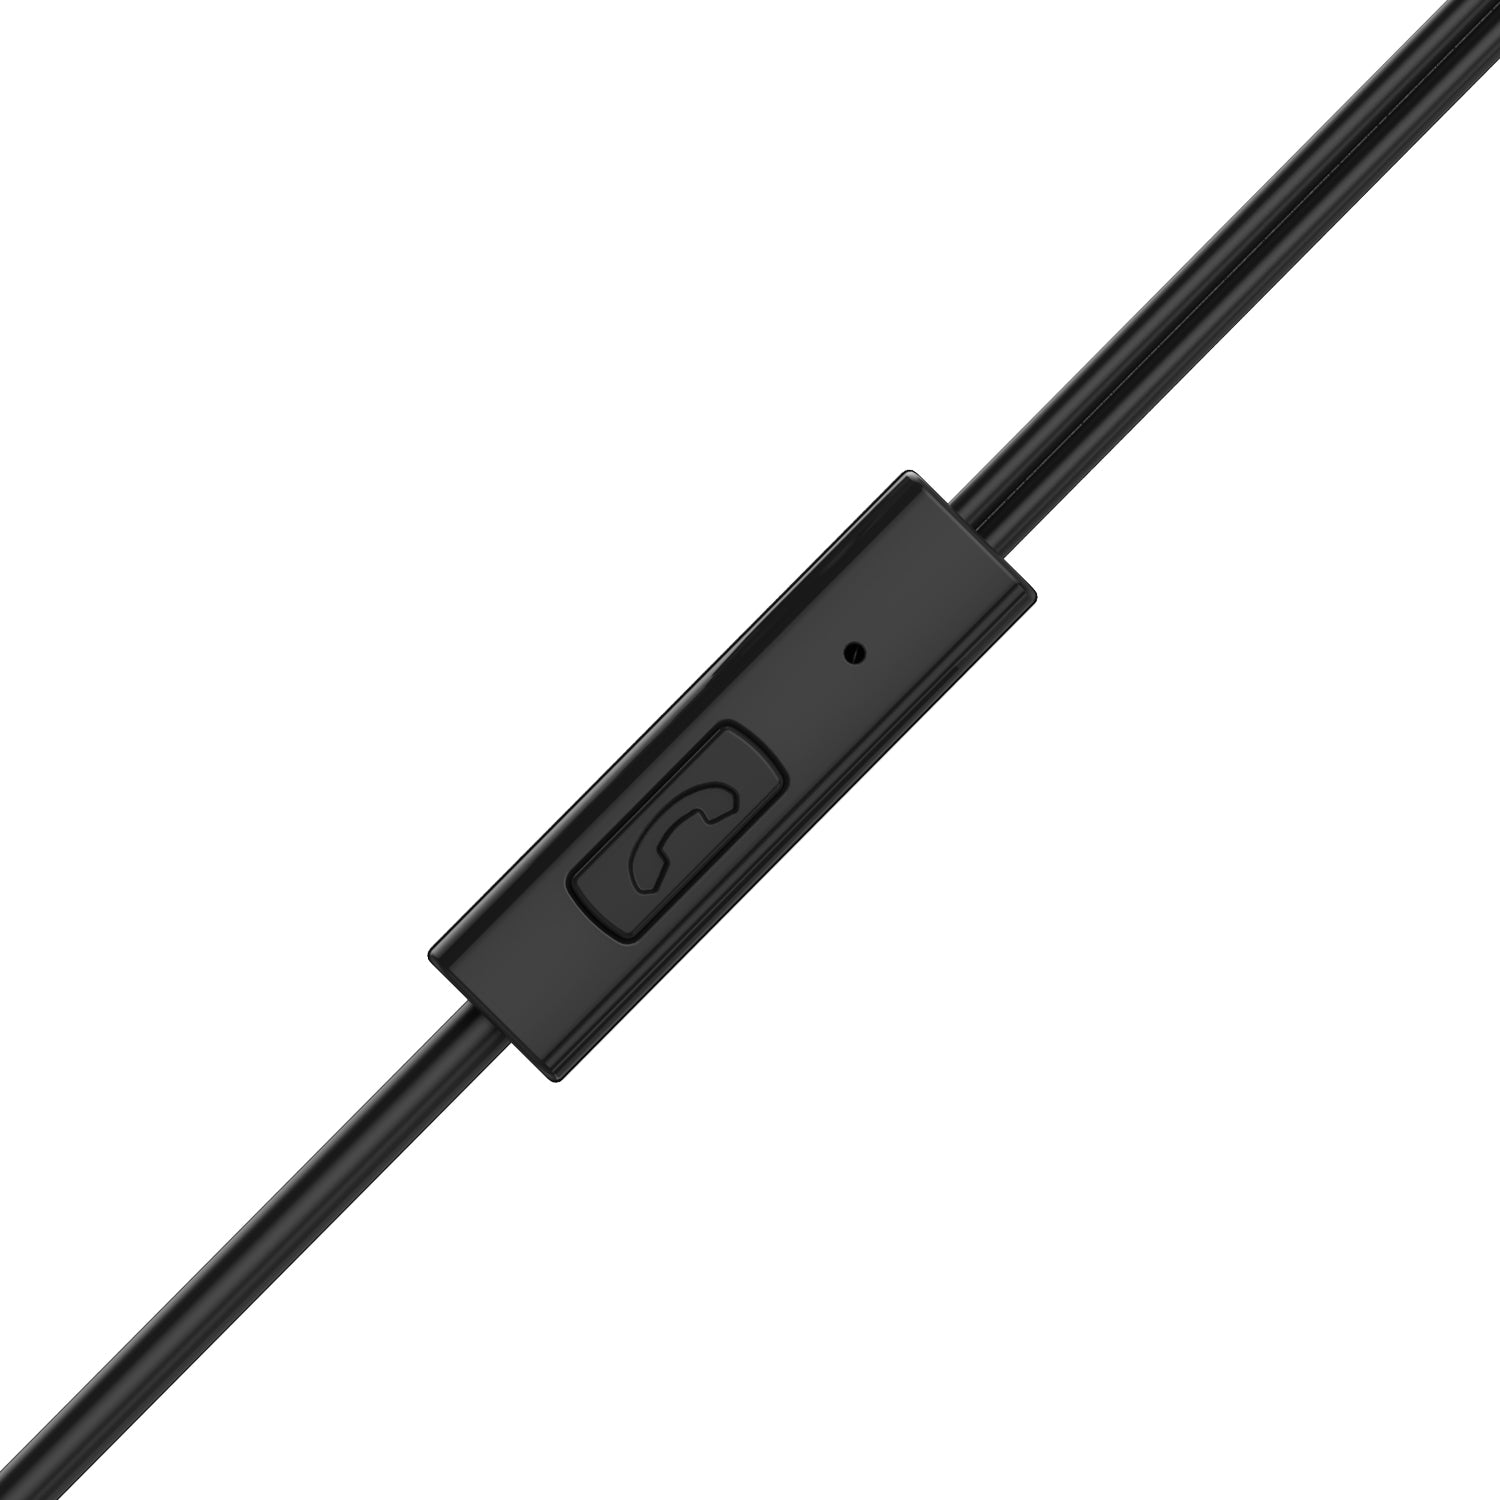 BassHeads 122 | Premium Wired Earphone with 10mm Driver, Metallic Finish, HD Sound, 3.5mm Straight Jack, Activate Voice Assistant with One Click - boAt Lifestyle